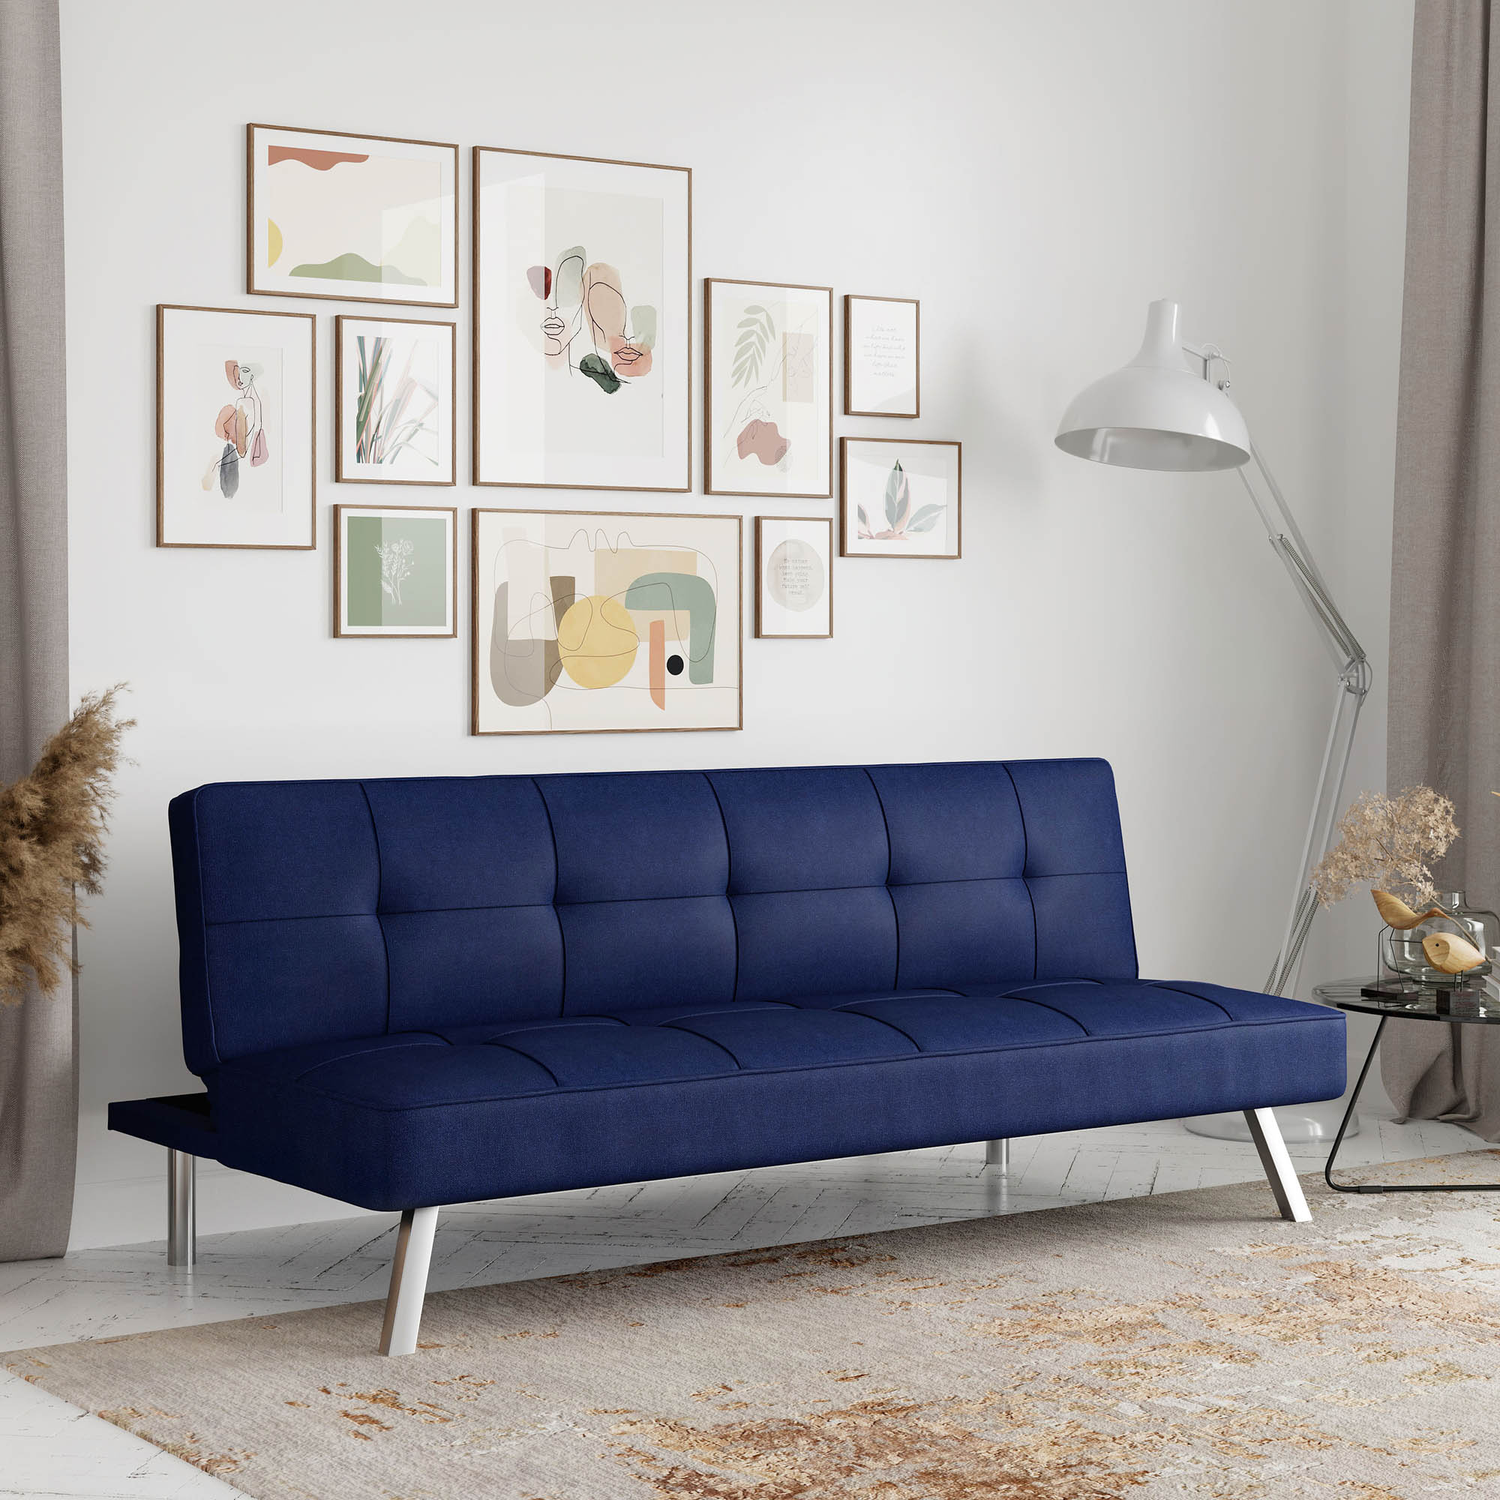 Serta Chelsea Convertible Sofa, Lounger and Full Size Bed, Blue Fabric